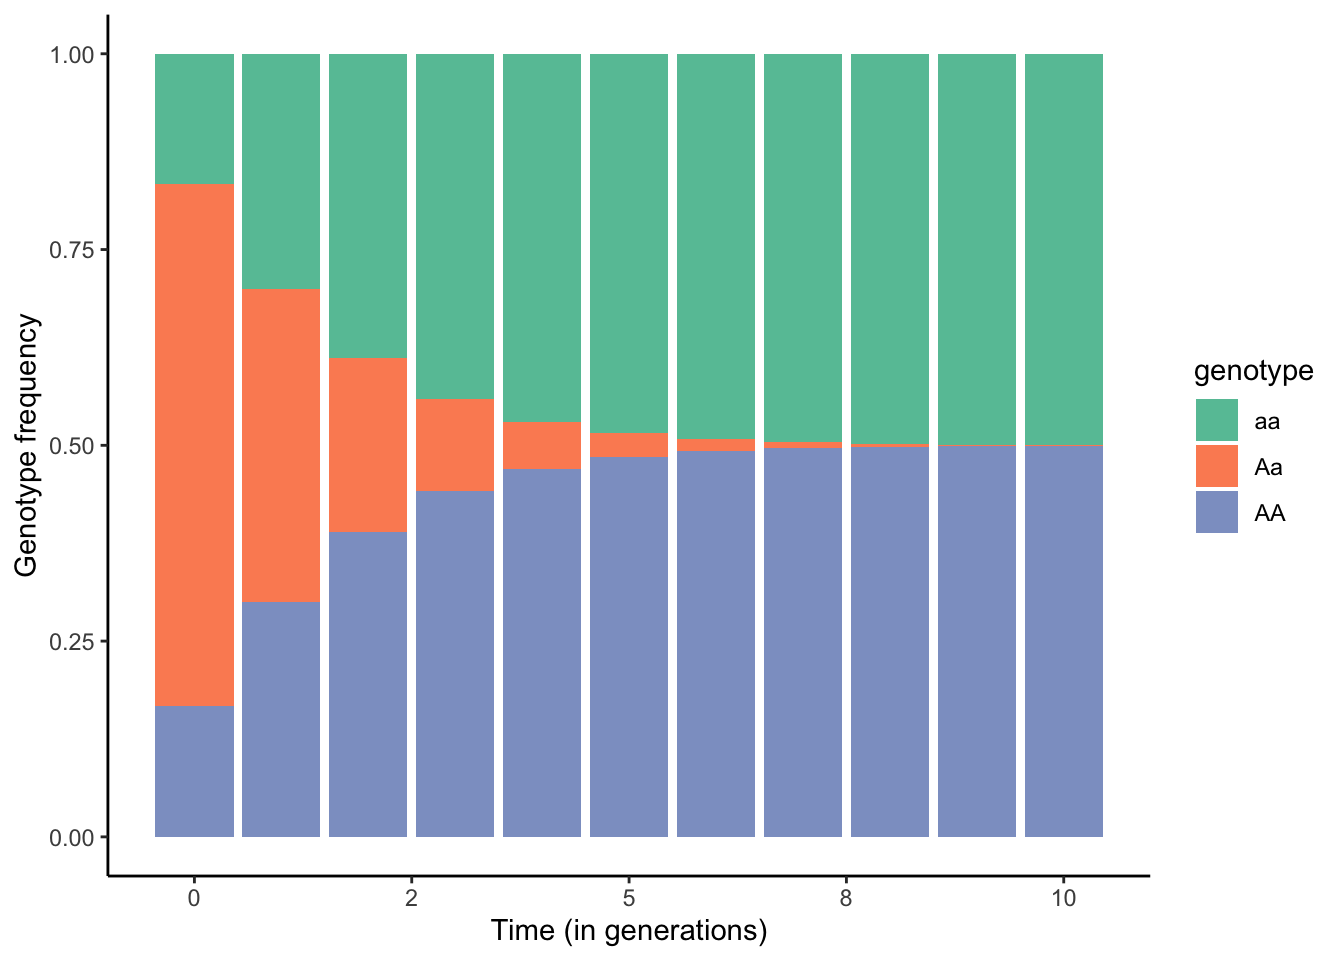 Changes in genotype frequencies across generations when all individuals in a population self-fertilize.